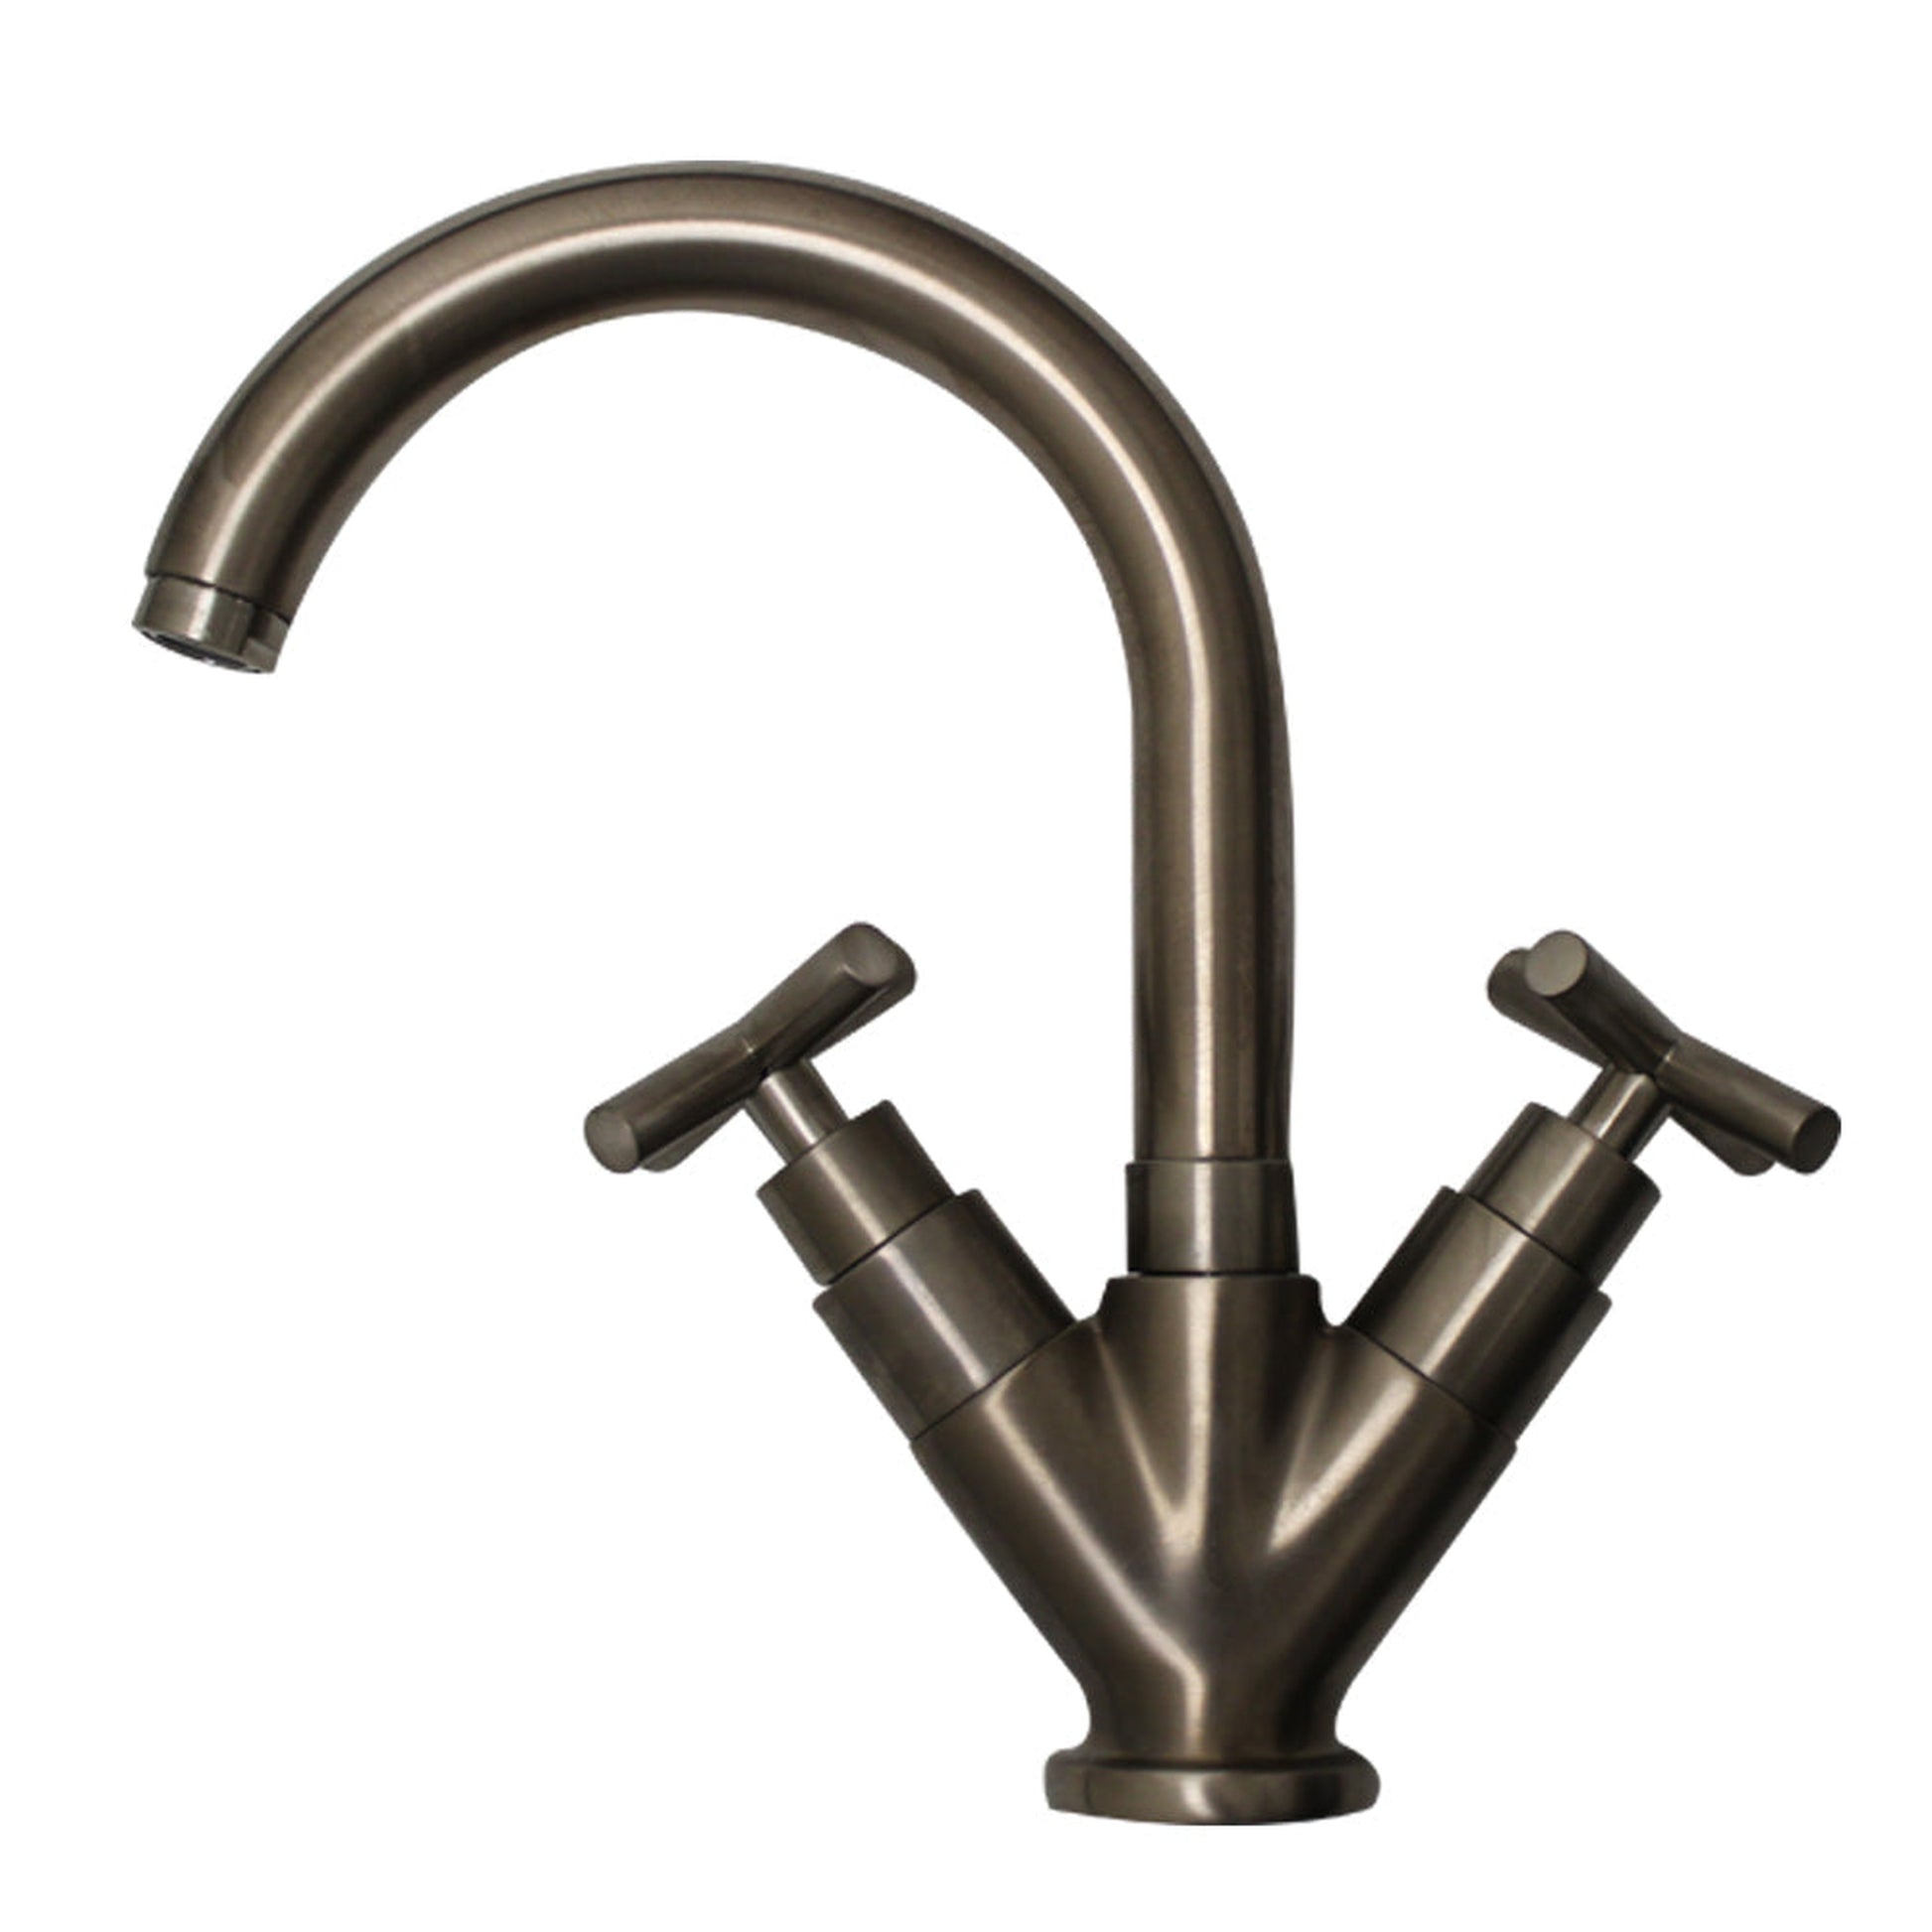 Whitehaus Luxe WHLX79250-BN Brushed Nickel Single Hole/Dual Handle Lavatory Faucet With Tubular Swivel Spout Cross Handles and Pop-up Waste